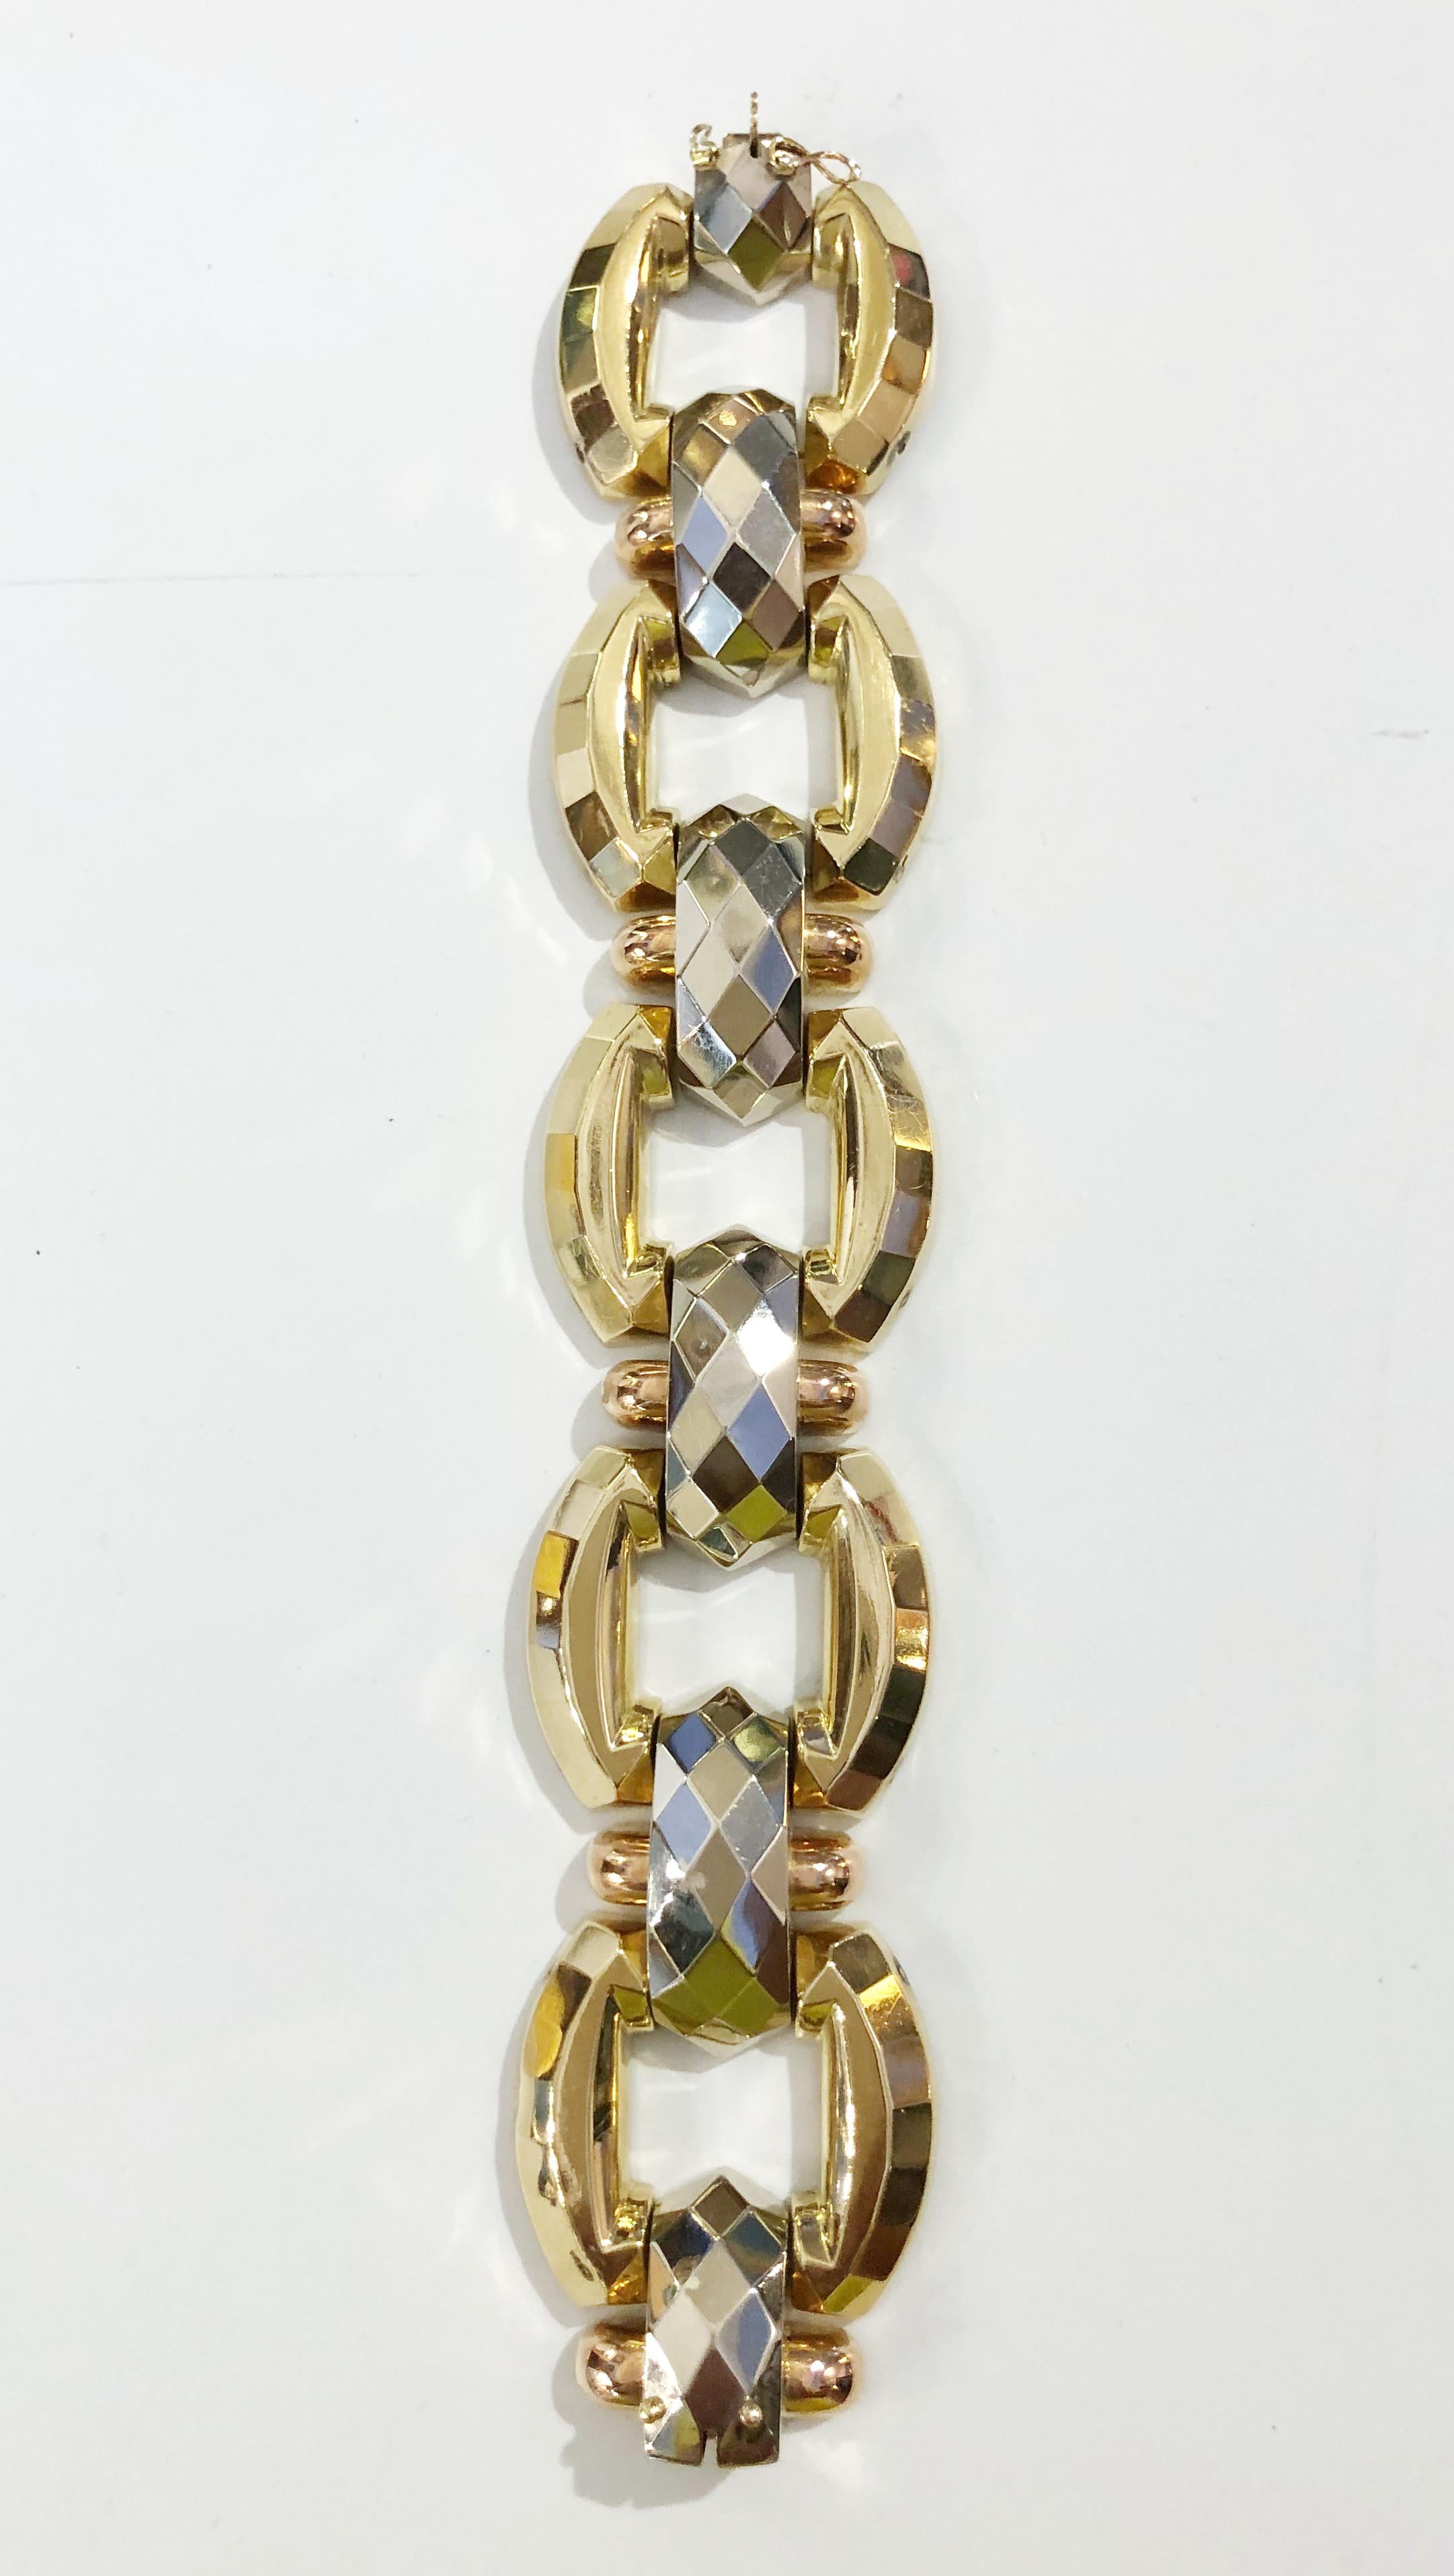 Vintage 18 karat gold links bracelet with yellow gold, rose gold, and white gold, Italy 1940s
Length 20 cm